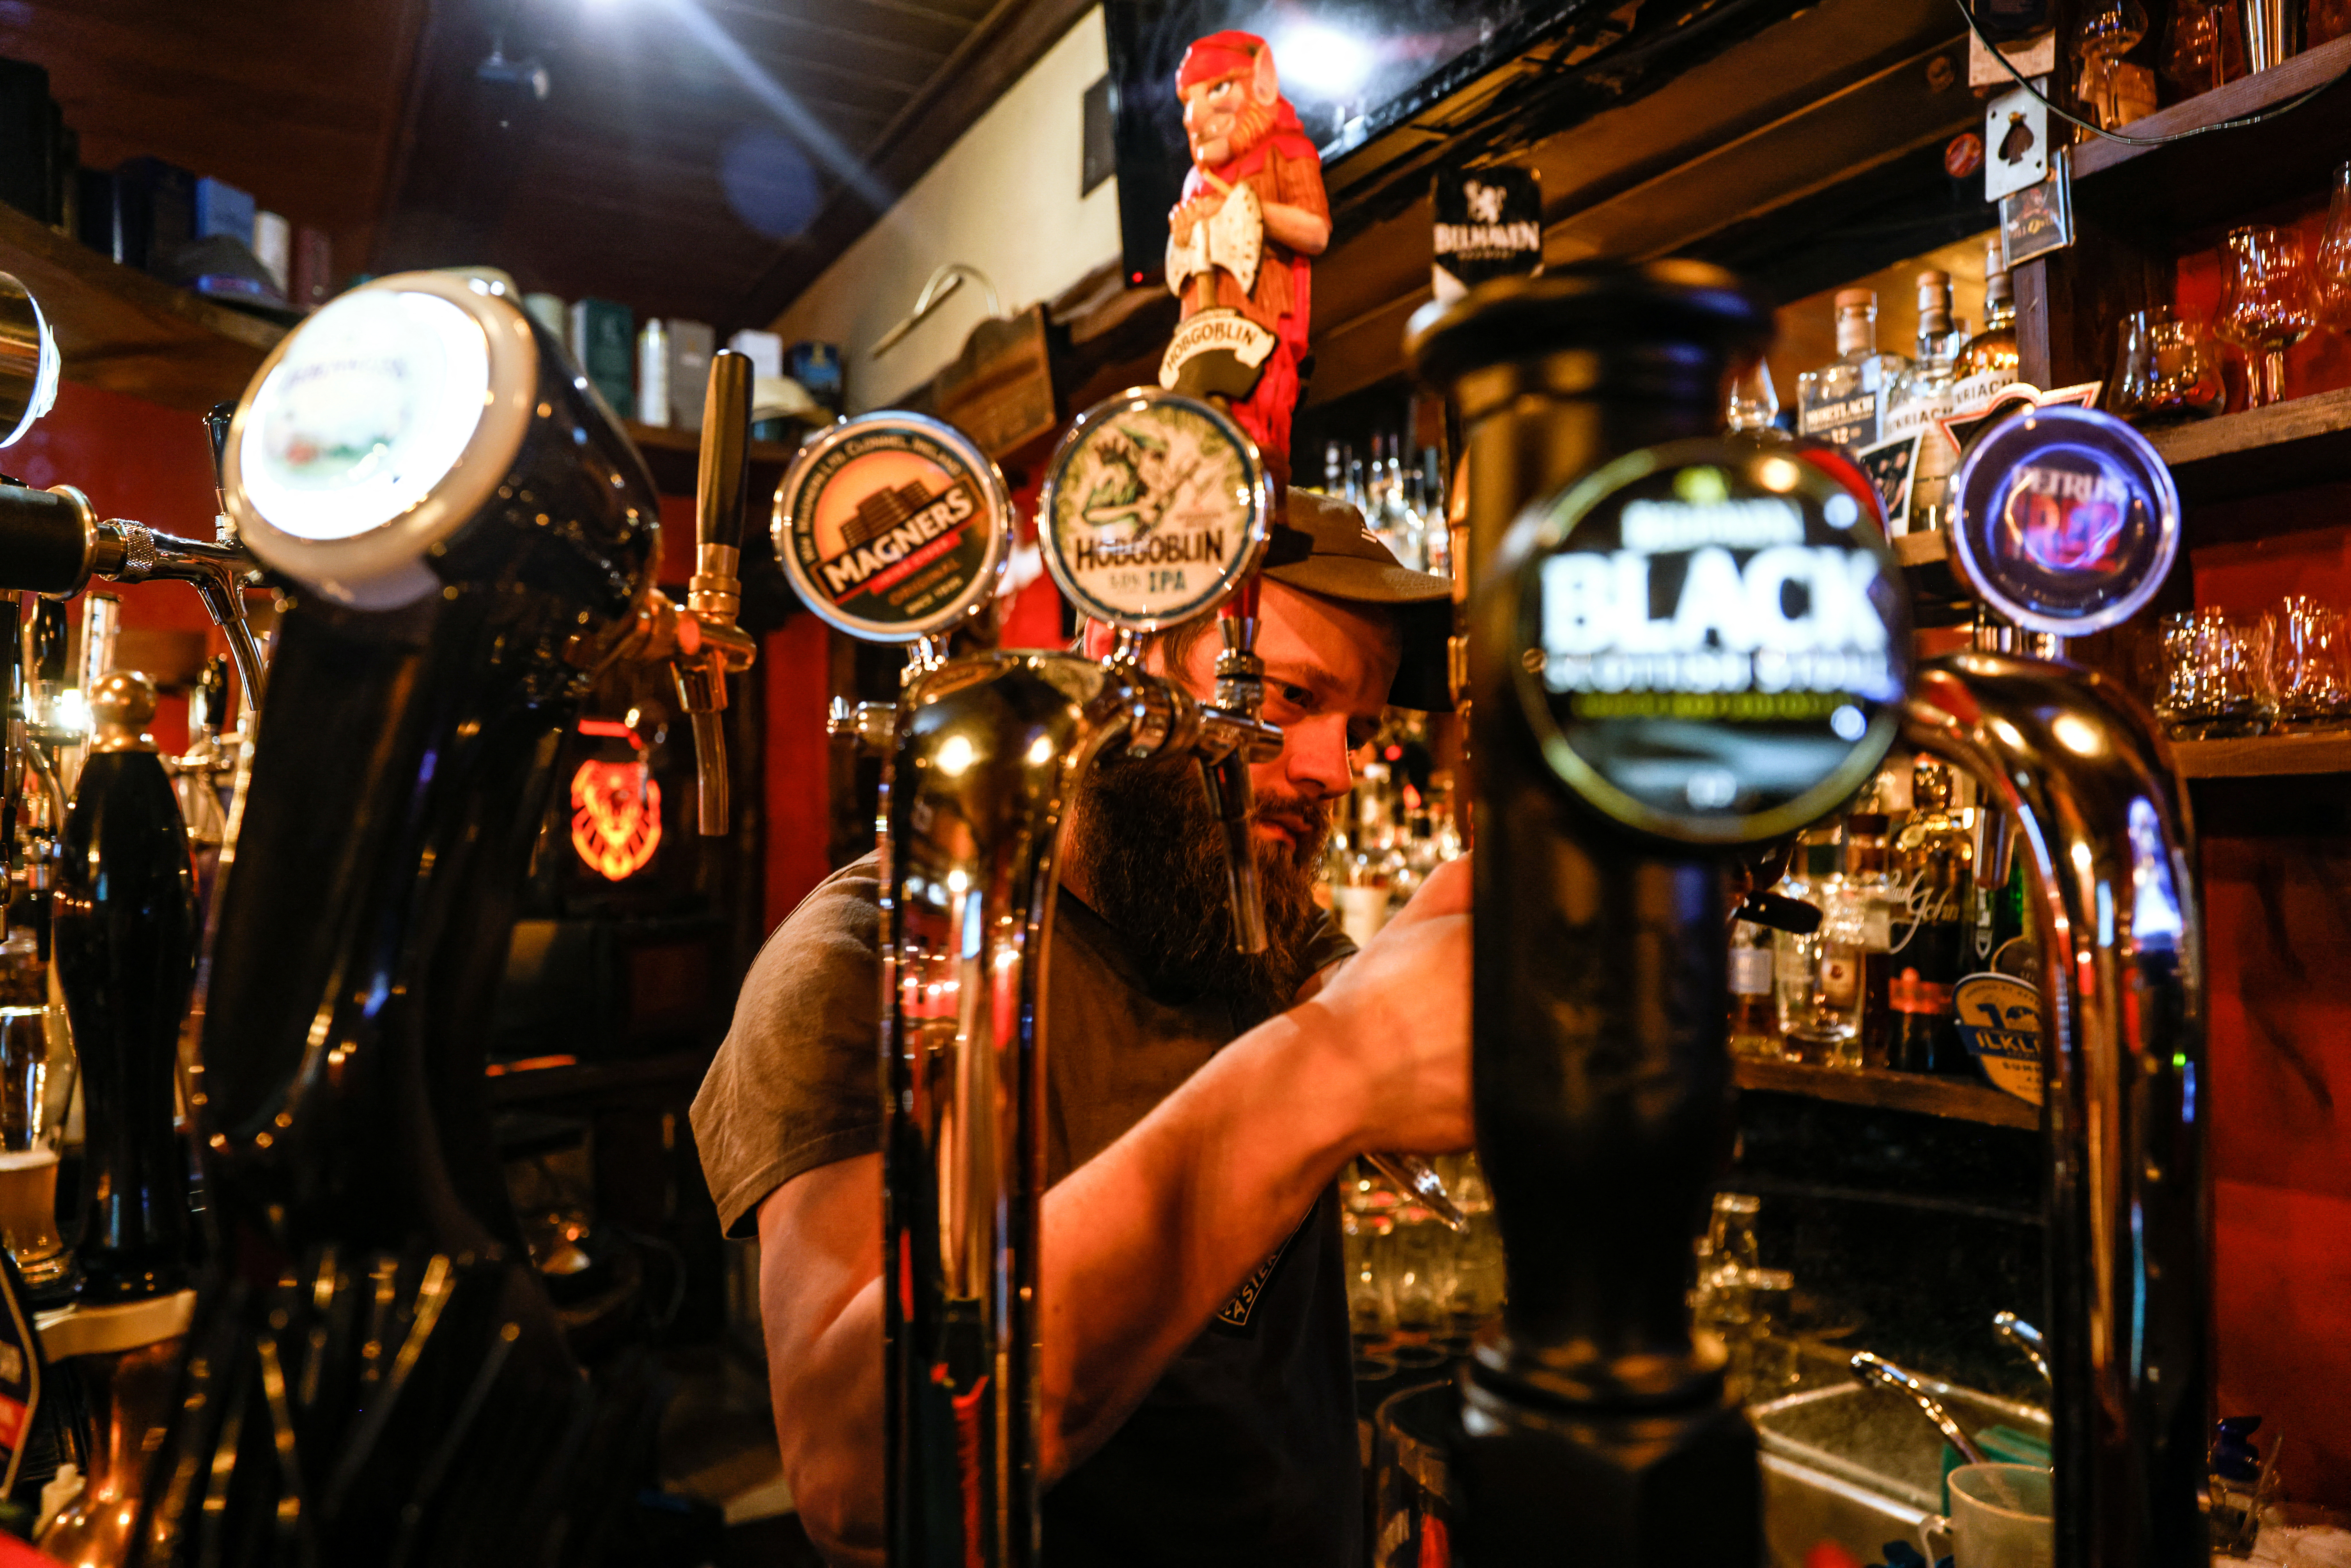 A bartender pours beer at a bar in Moscow